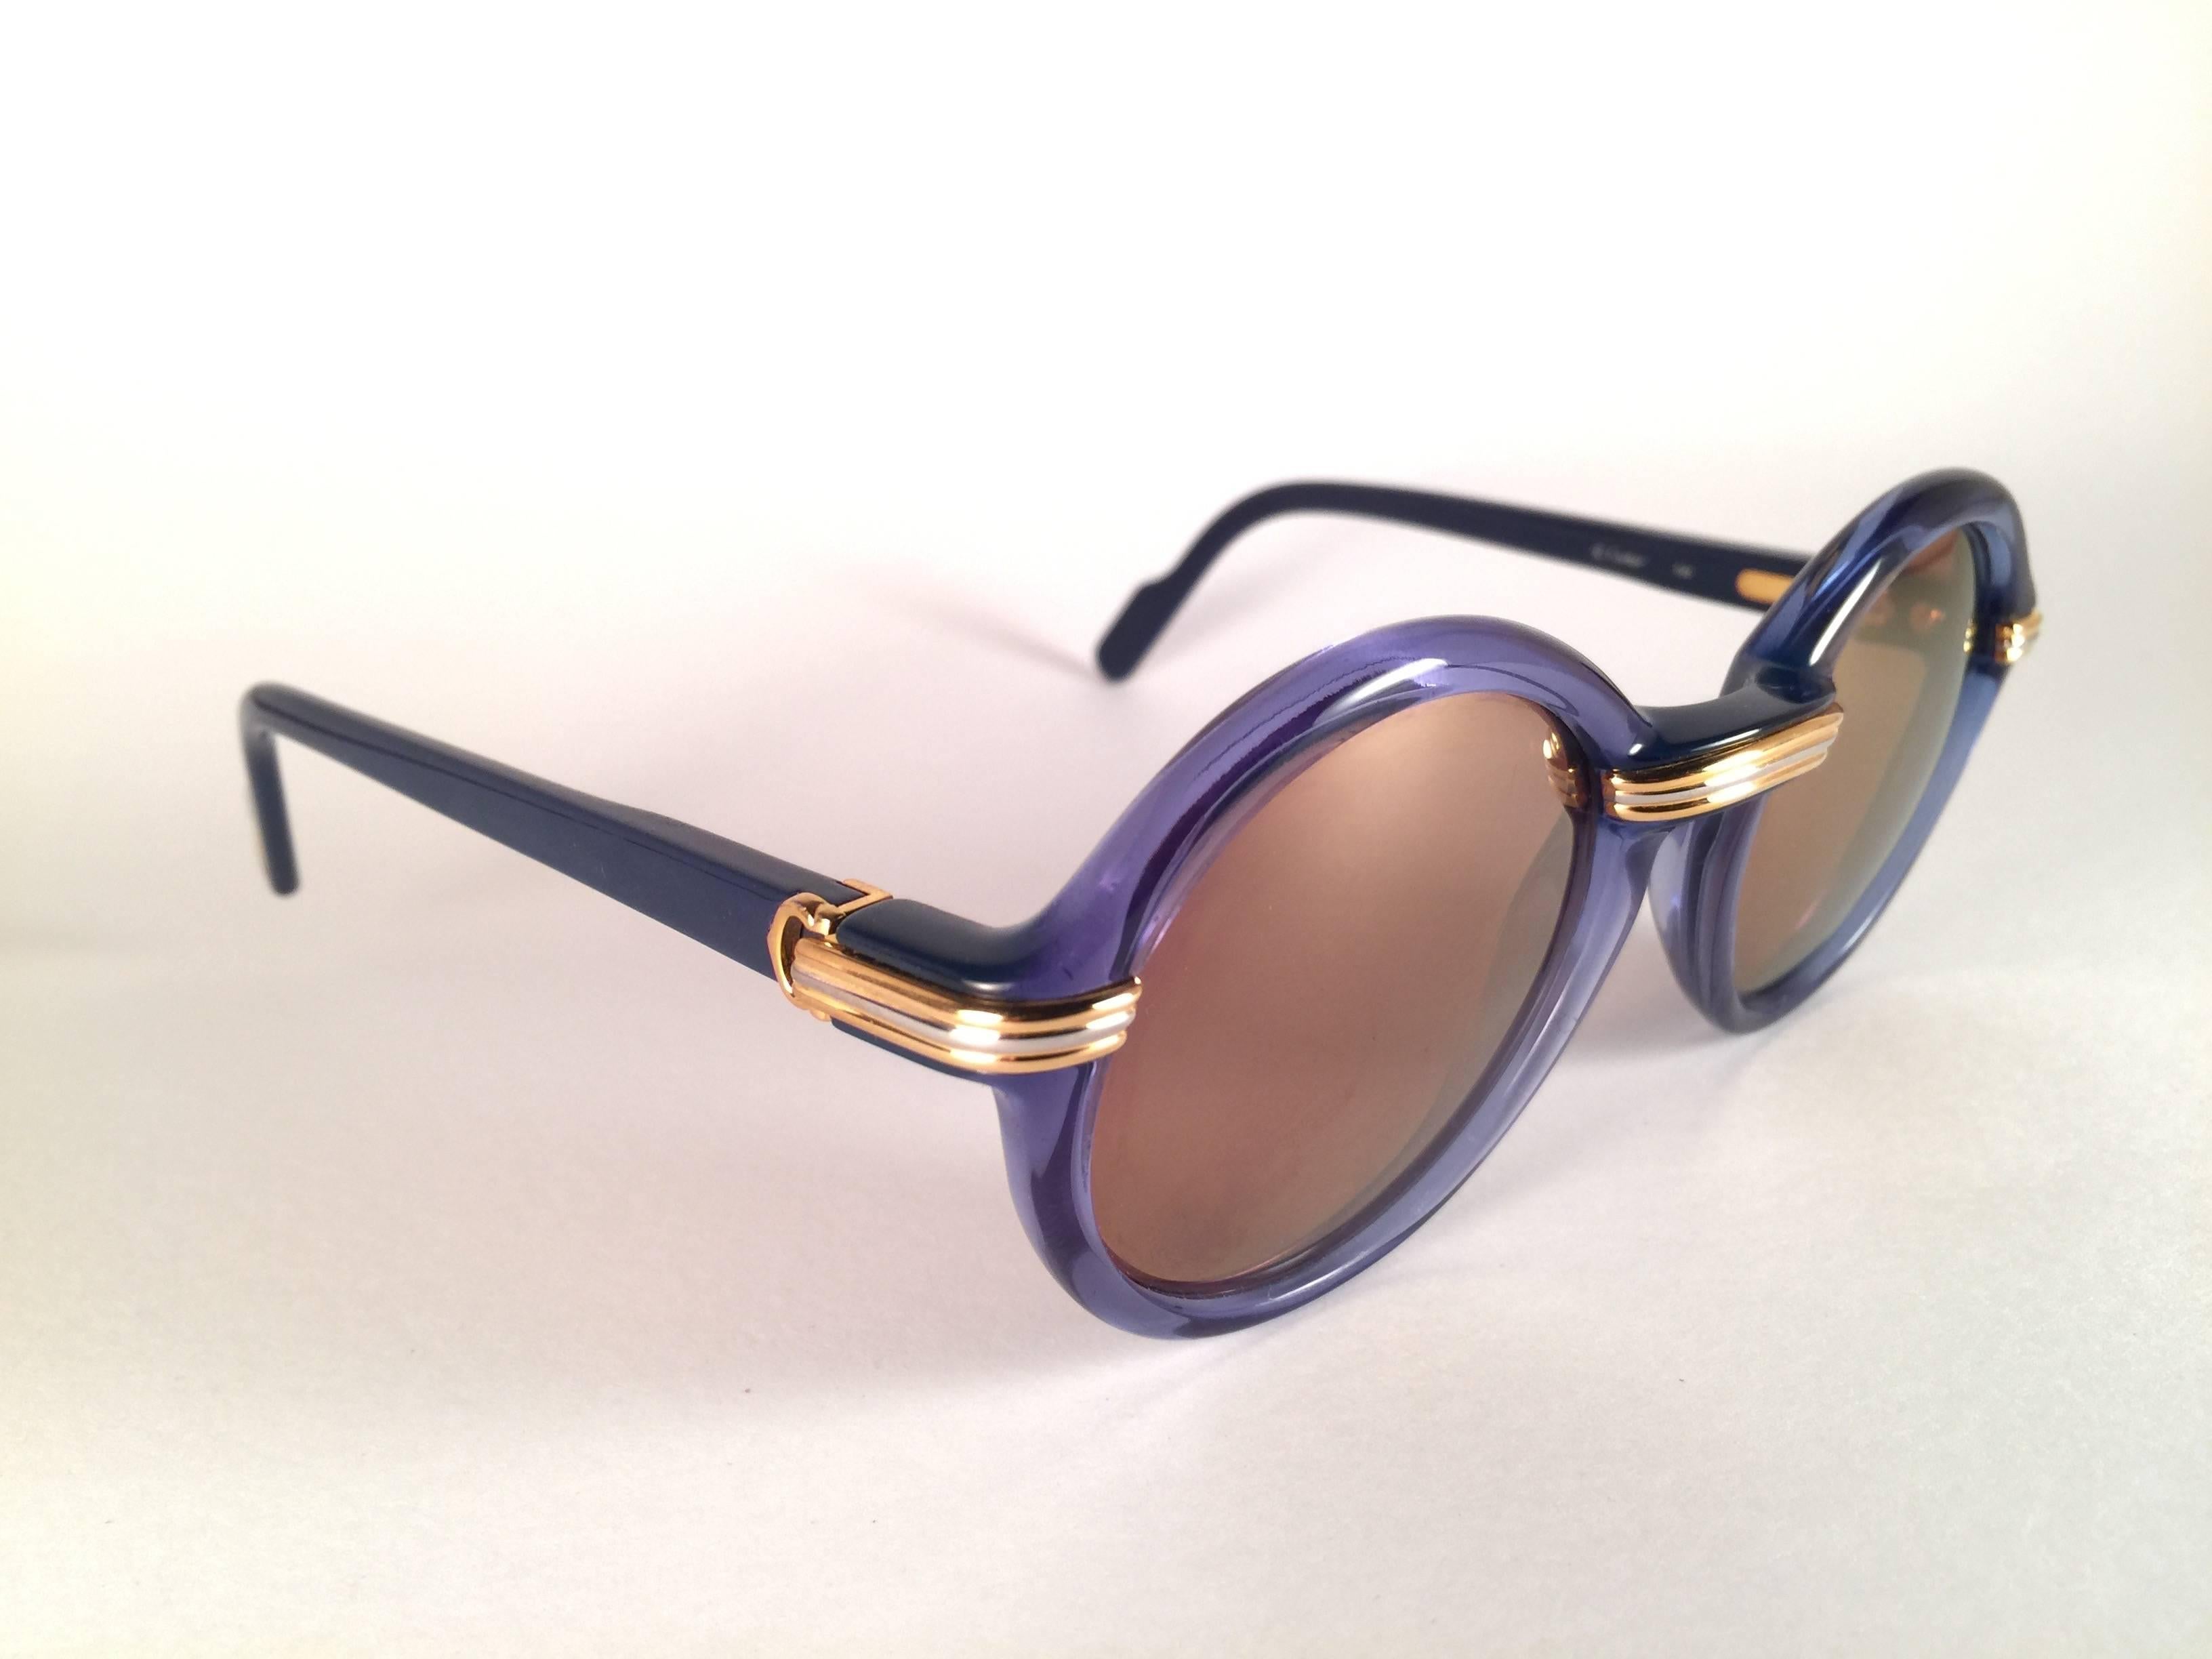 
New 1991 Original Cartier Cabriolet Art Deco Translucent Blue sunglasses G15 Gold Mirror ( uv protection ) lenses. Frame has the famous real gold and white gold accents in the middle and on the sides.  All hallmarks. Cartier gold signs on the